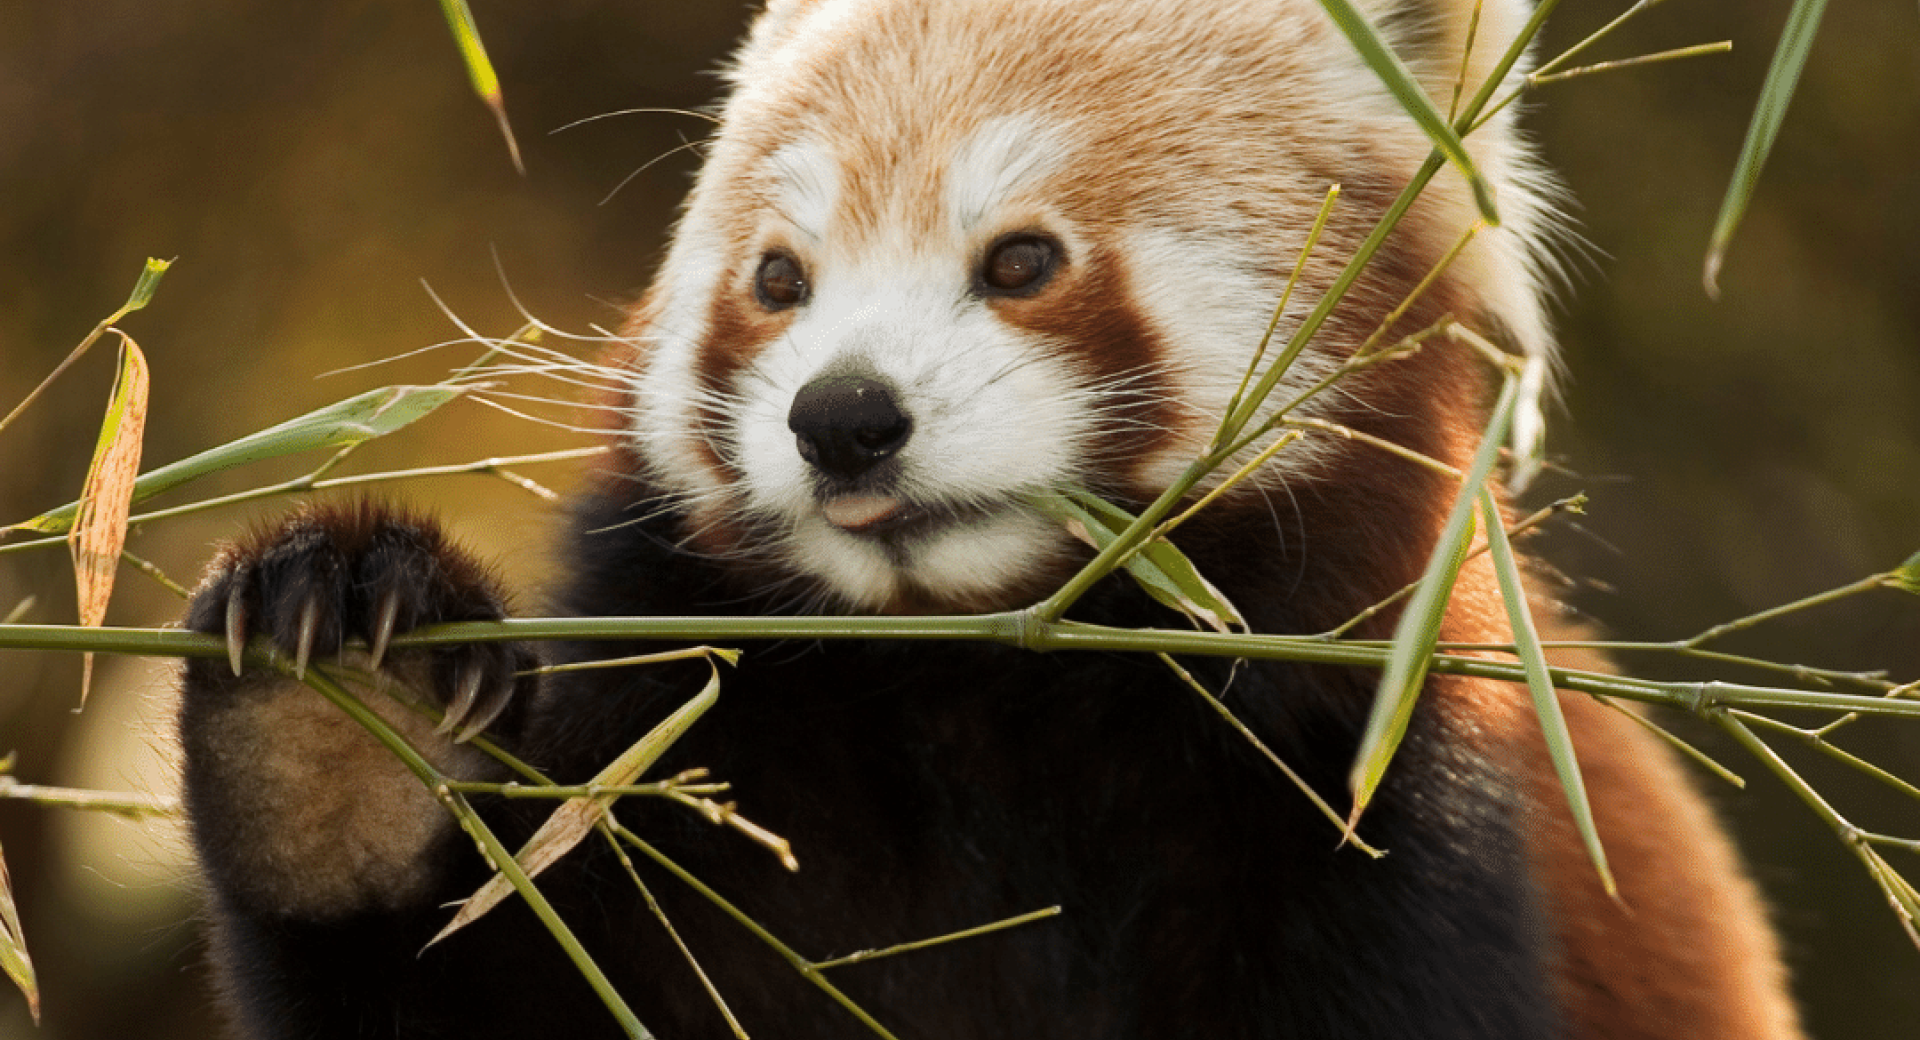 What is Driving the Increased Demand for Red Panda Pelts?